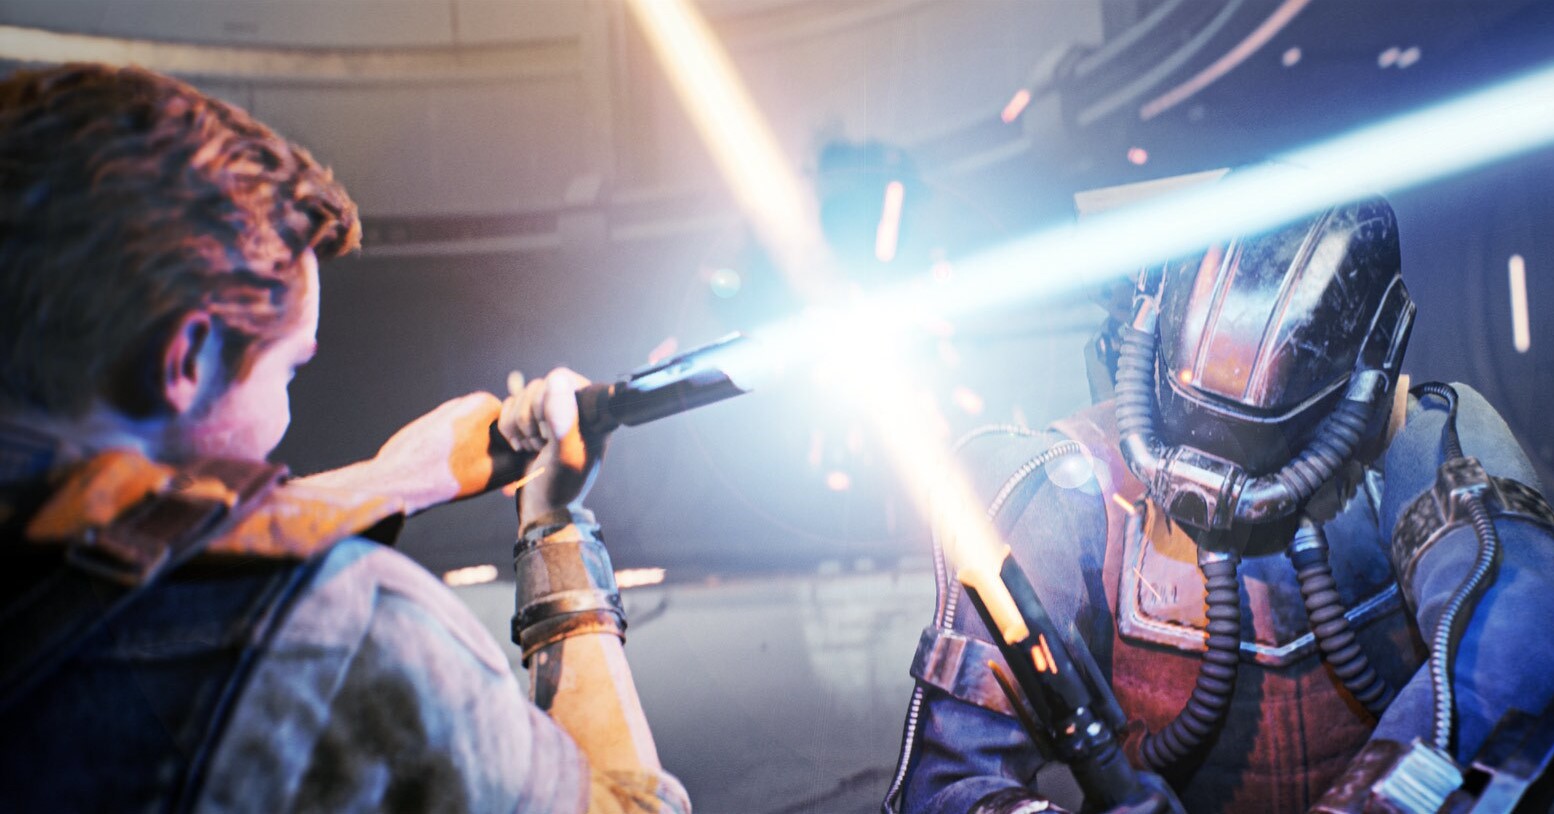 Cal locking lightsabers with a masked enemy. Cal holds a blue lightsaber in both hands, parrying the enemy's orange lightsaber.